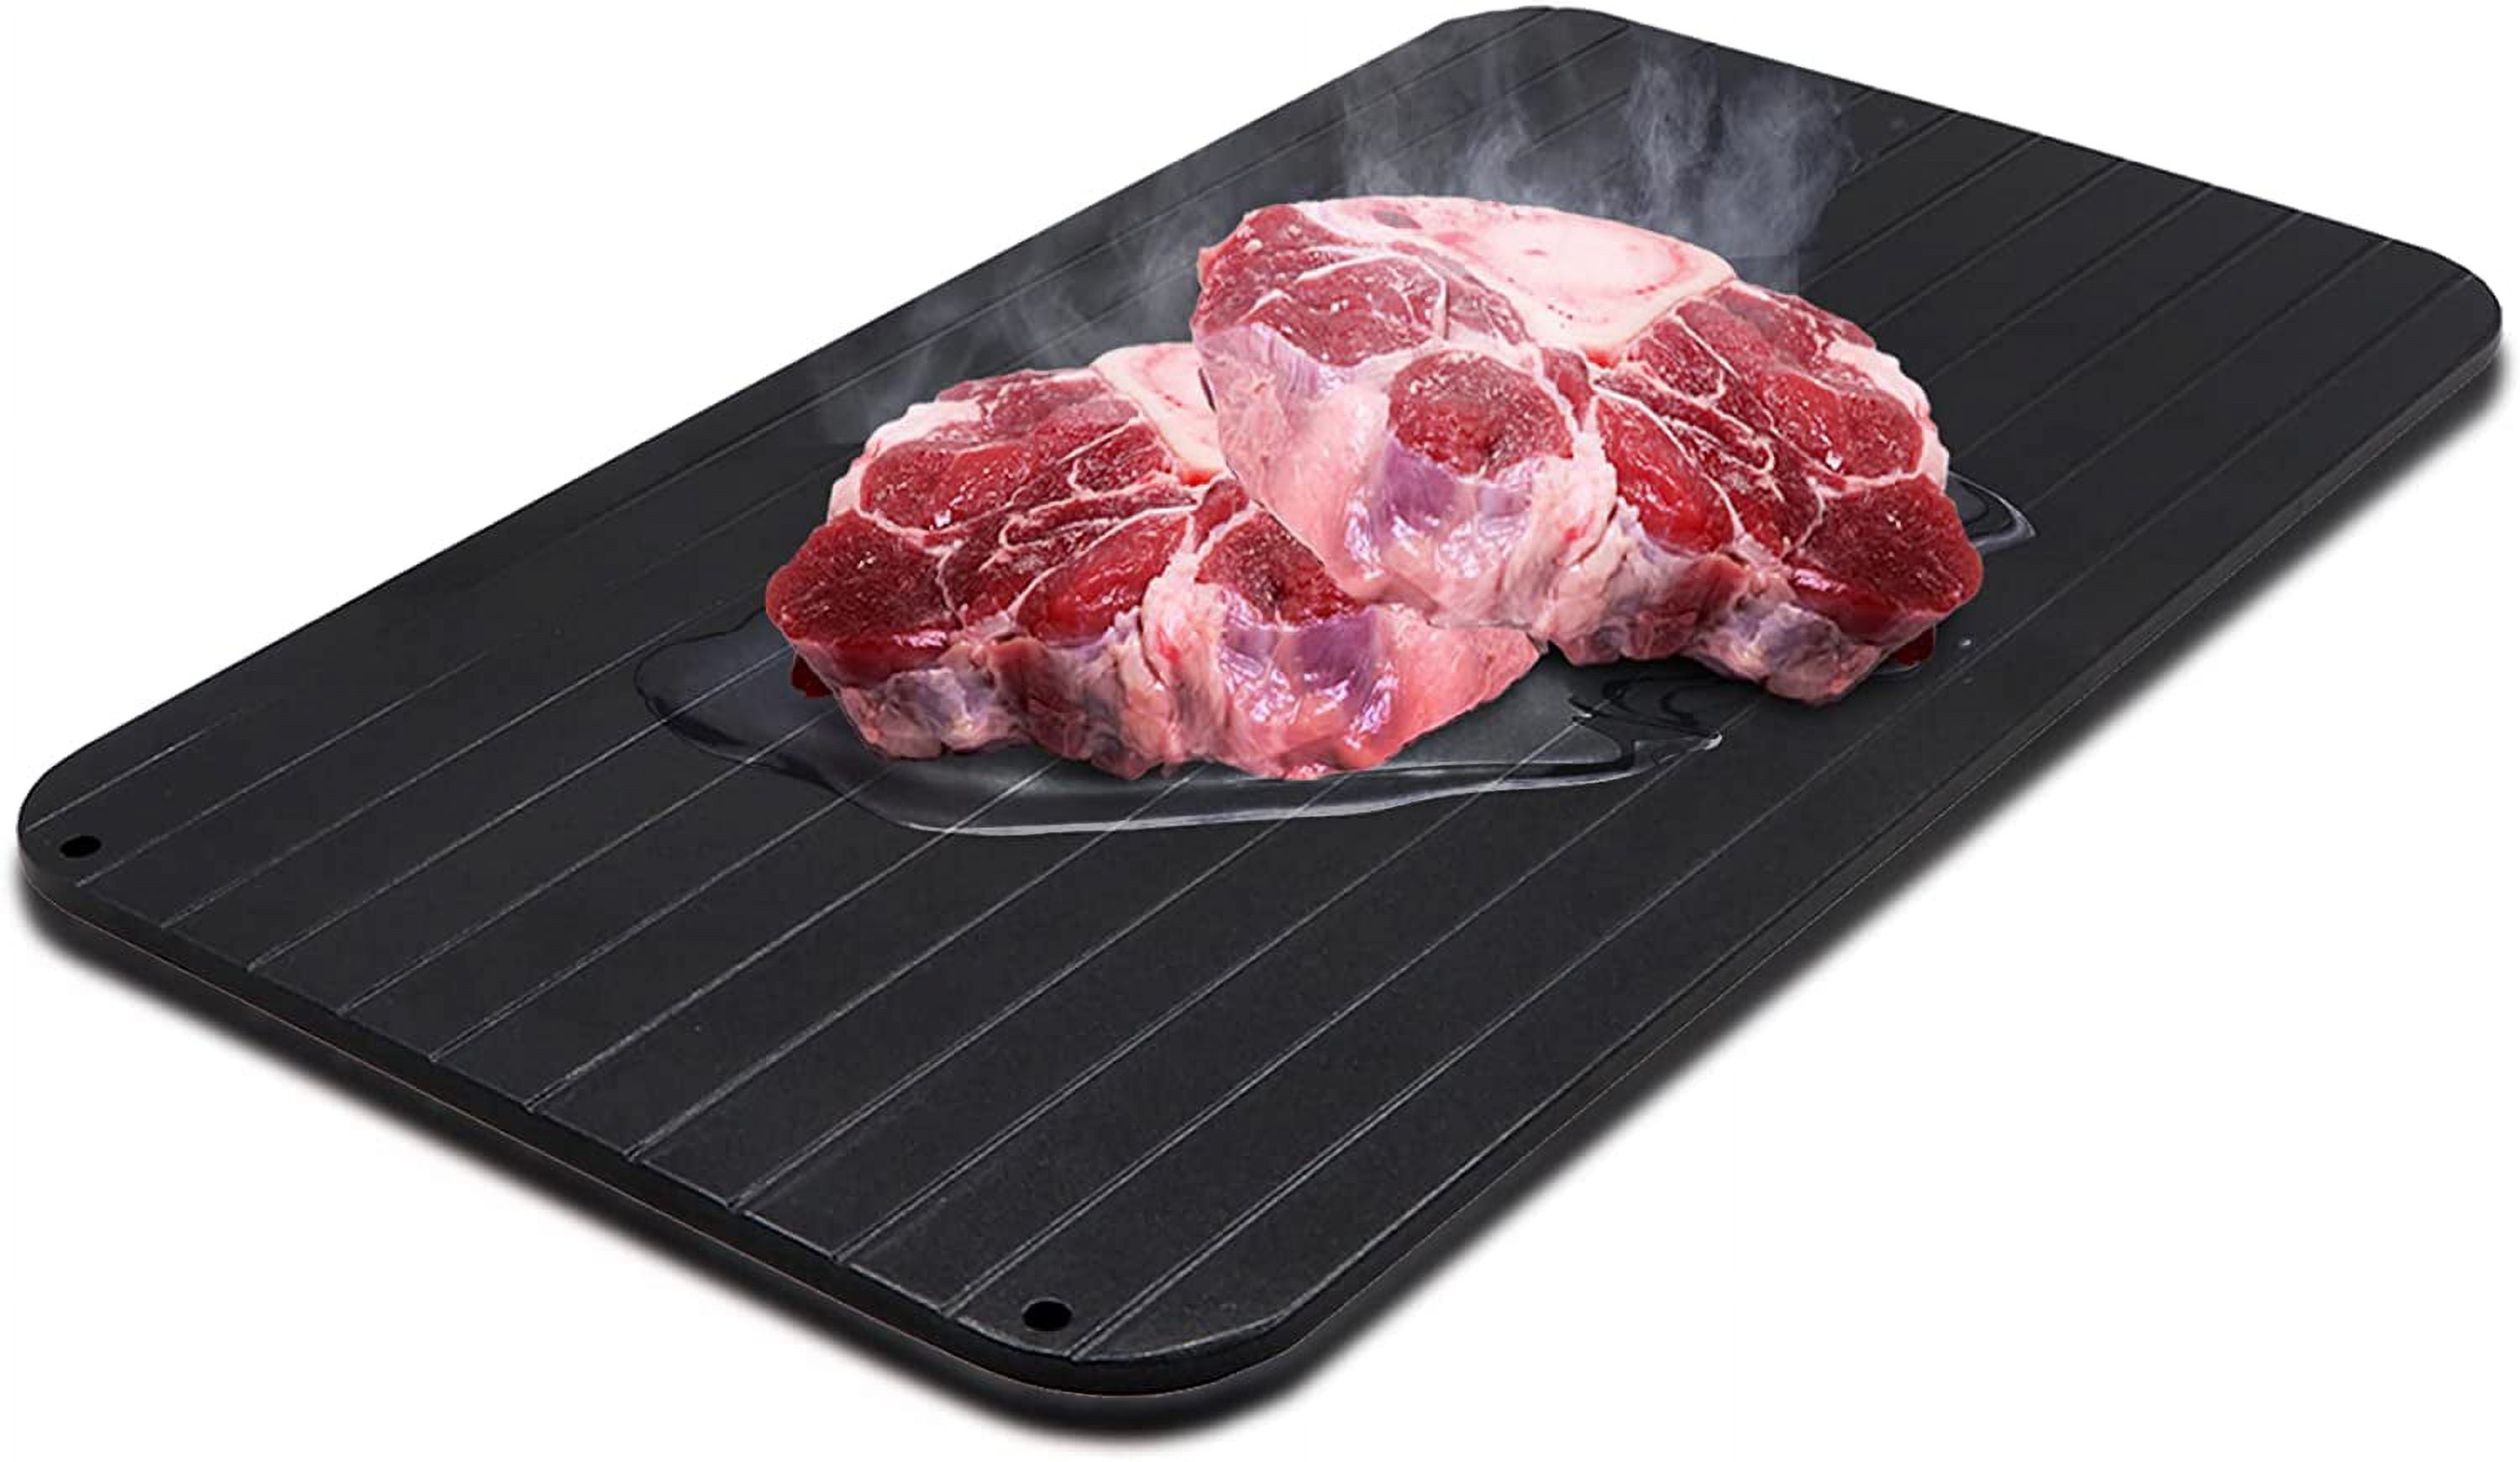 Meat Thawing Plate